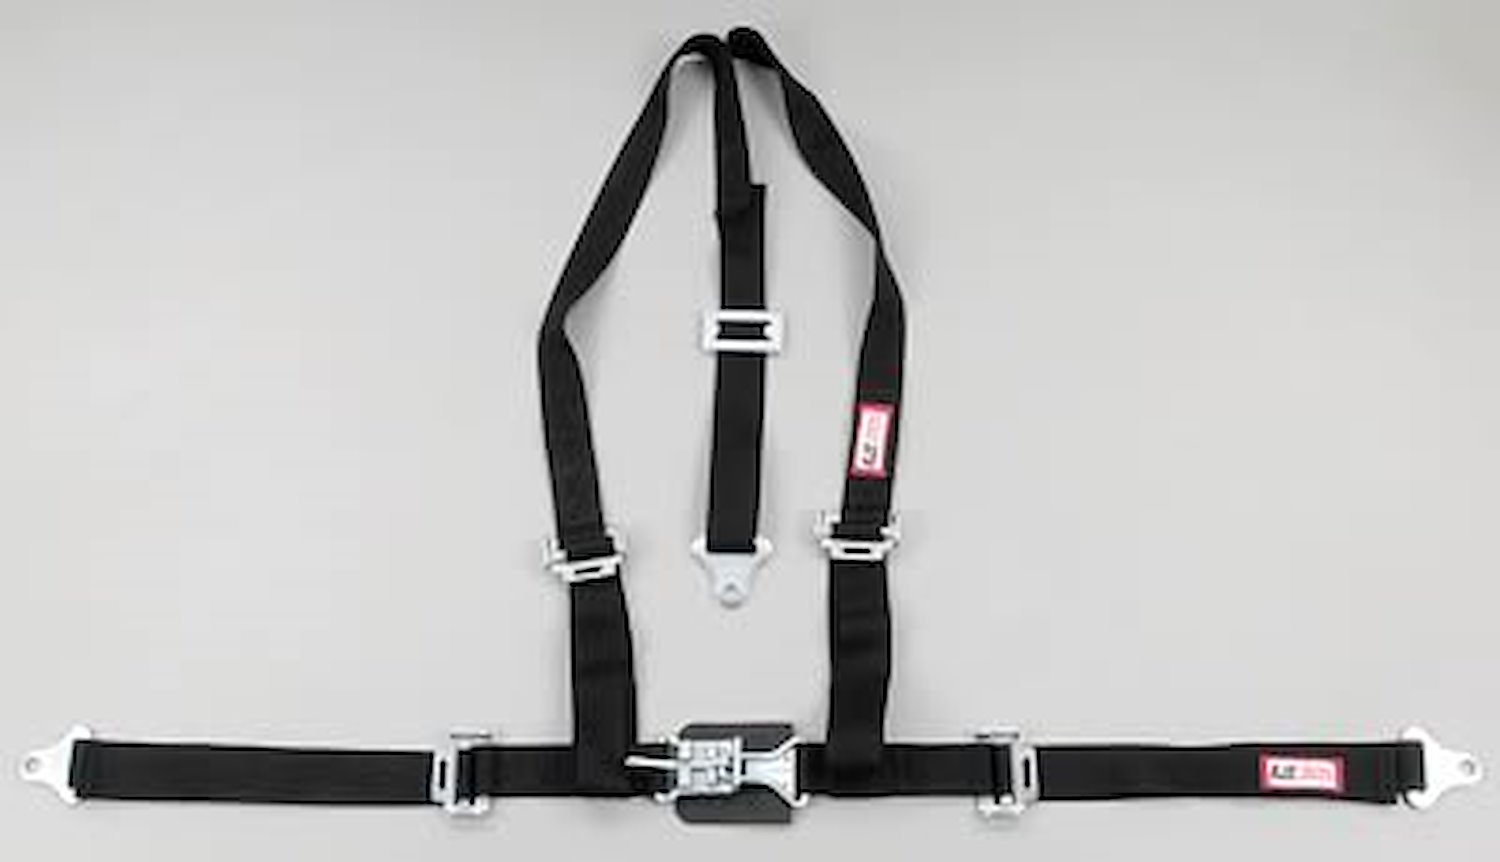 NON-SFI L&L HARNESS 3 PULL DOWN Lap BELT SNAP SEWN IN 2 S.H. Y FLOOR Mount WRAP/BOLT YELLOW